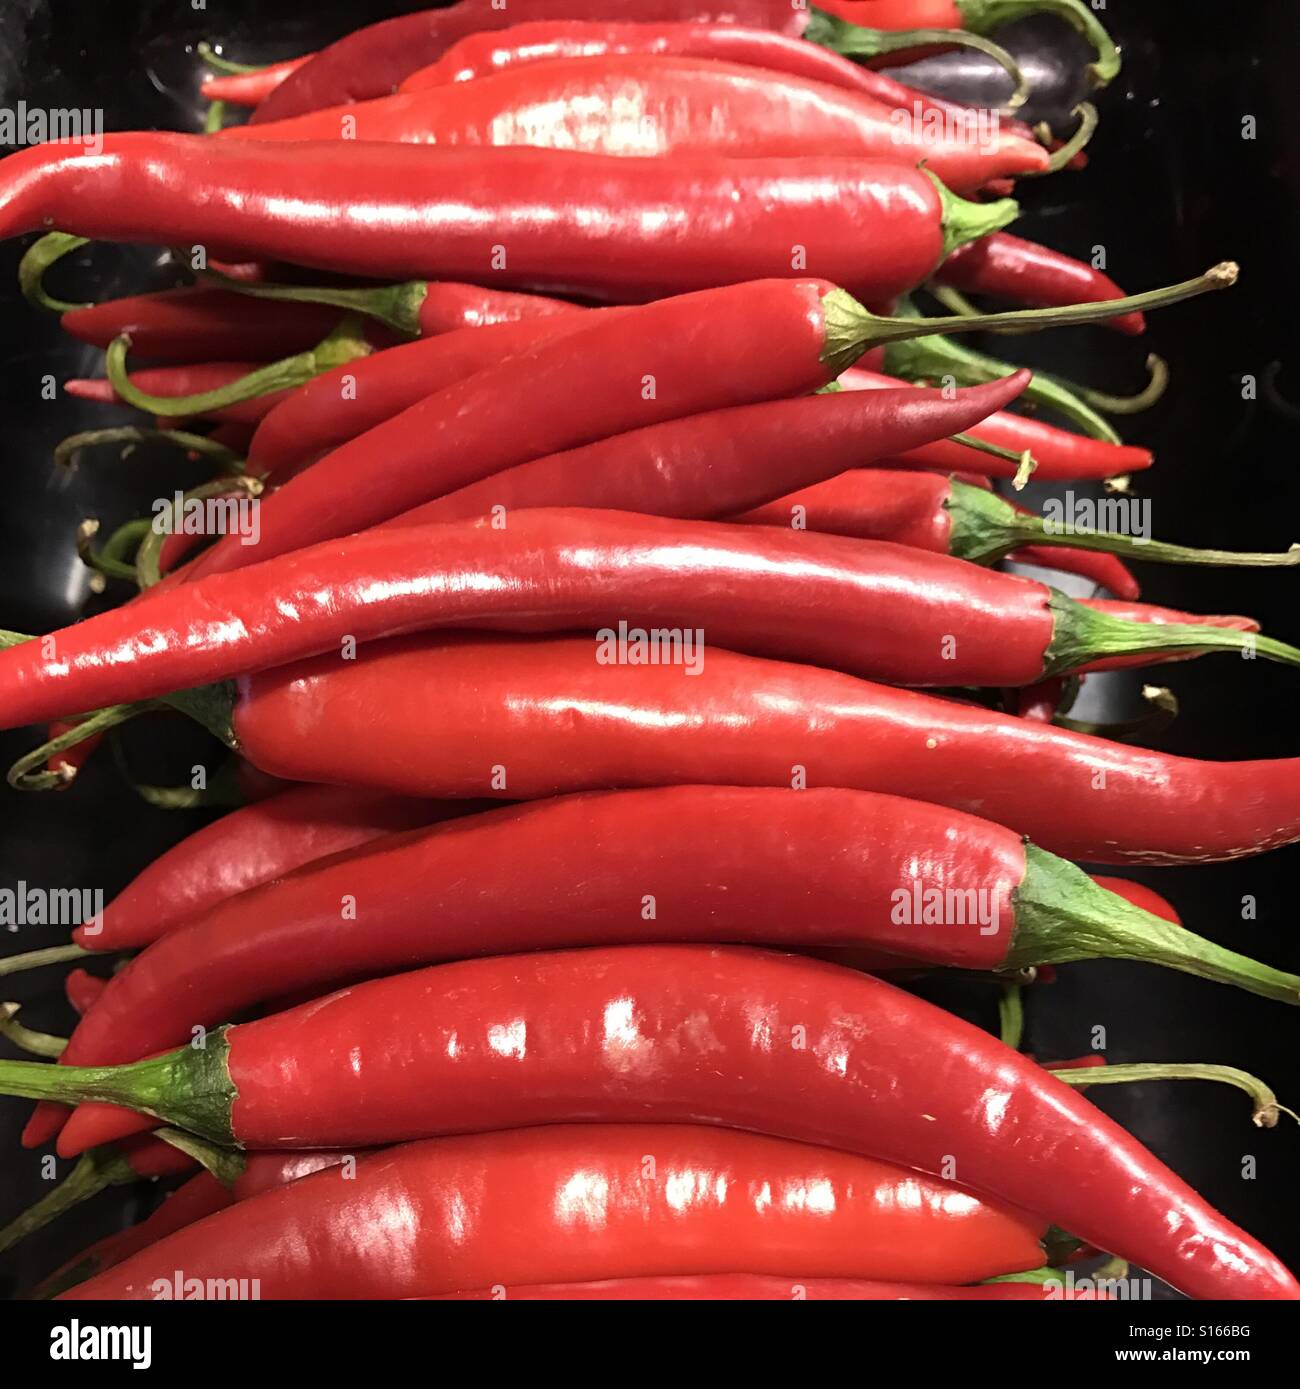 Red hot chillis Stock Photo